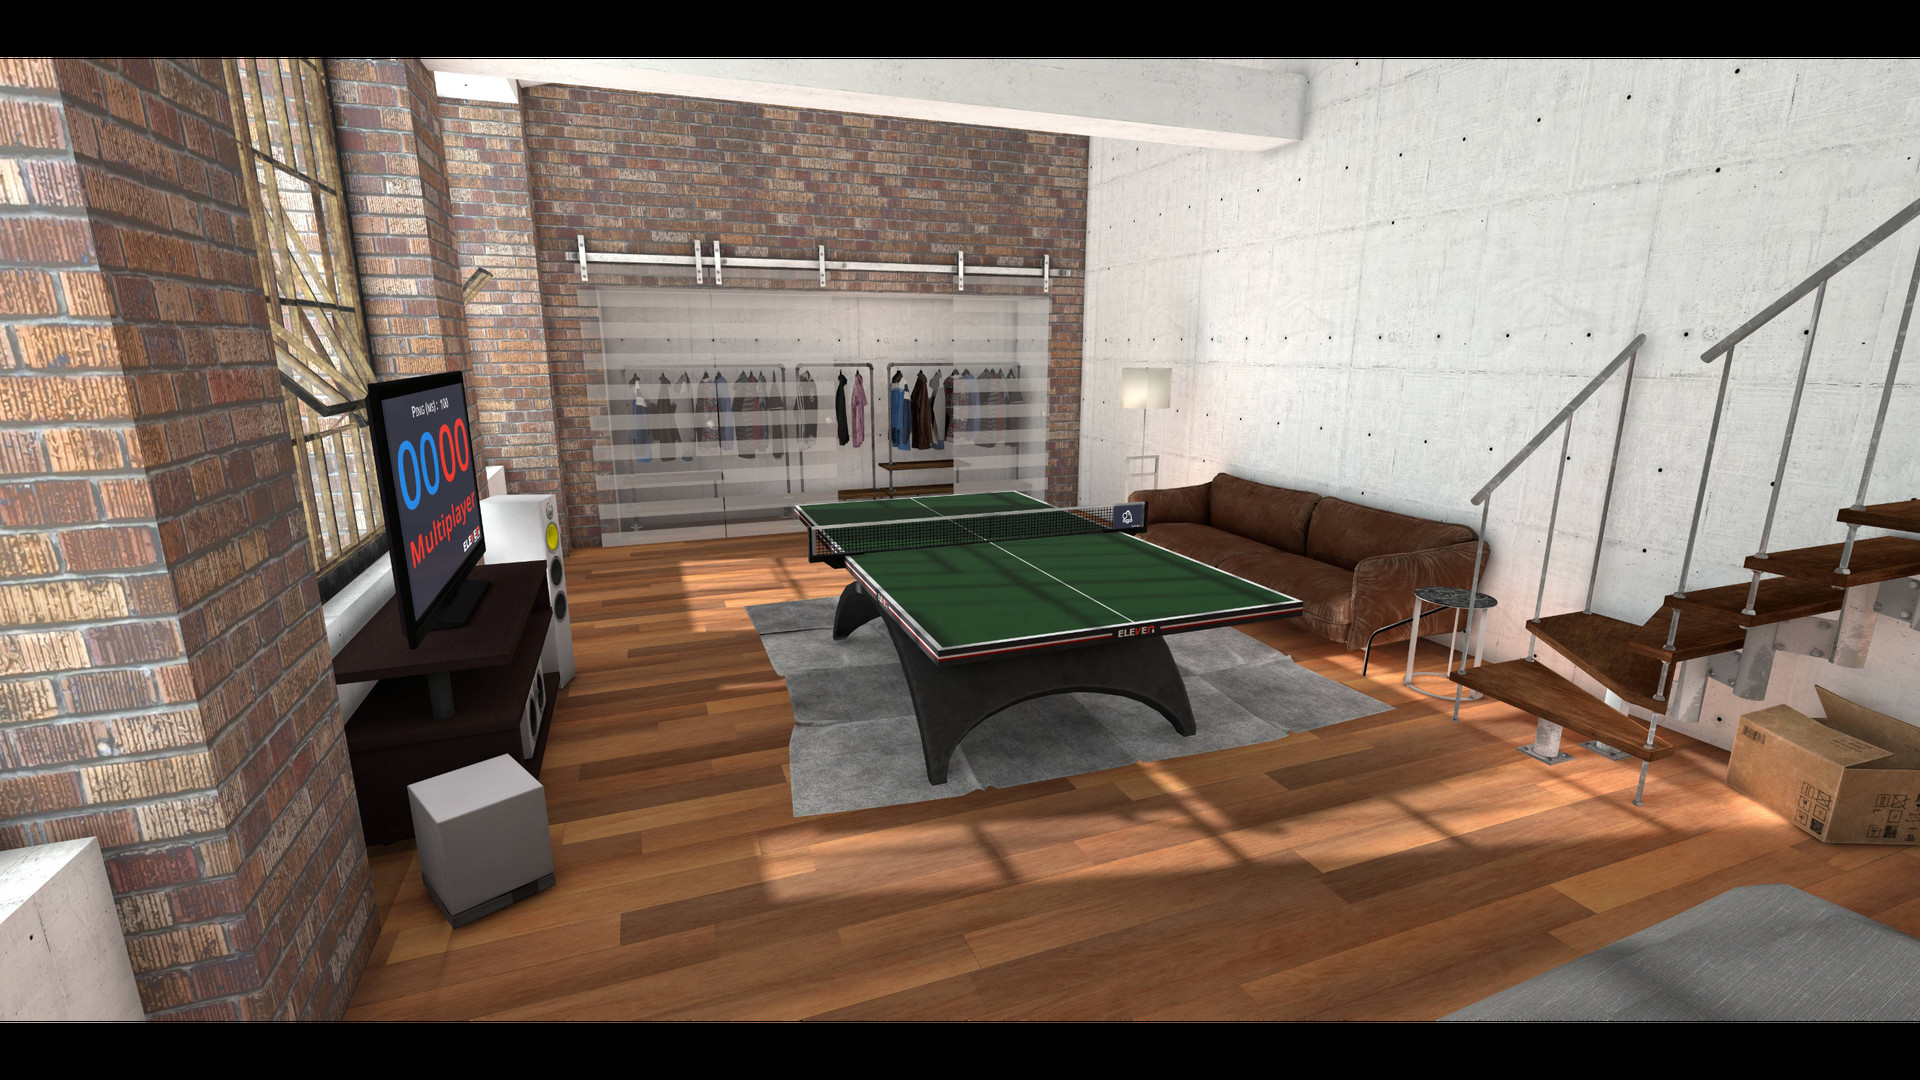 Eleven Table Tennis on Steam